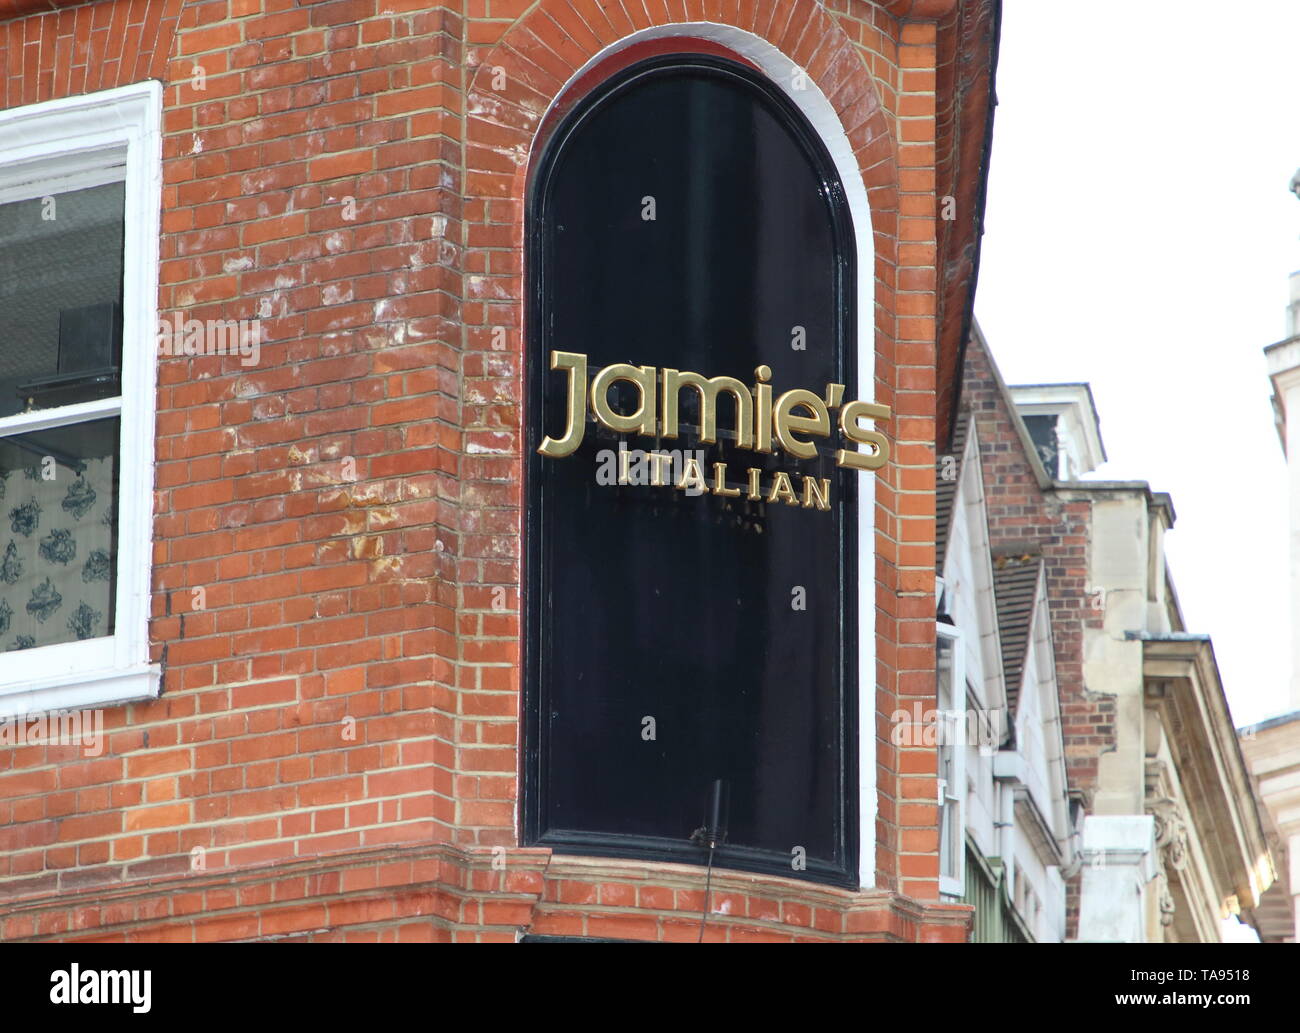 Celebrity chef Jamie Oliver's restaurant group has gone into administration, with 1,000 jobs being lost. The group, which includes the Jamie's Italian chain, Barbecoa and Fifteen, has appointed KPMG as administrators. Twenty two of the 25 restaurants in Jamie Oliver's restaurant group have now closed. Stock Photo